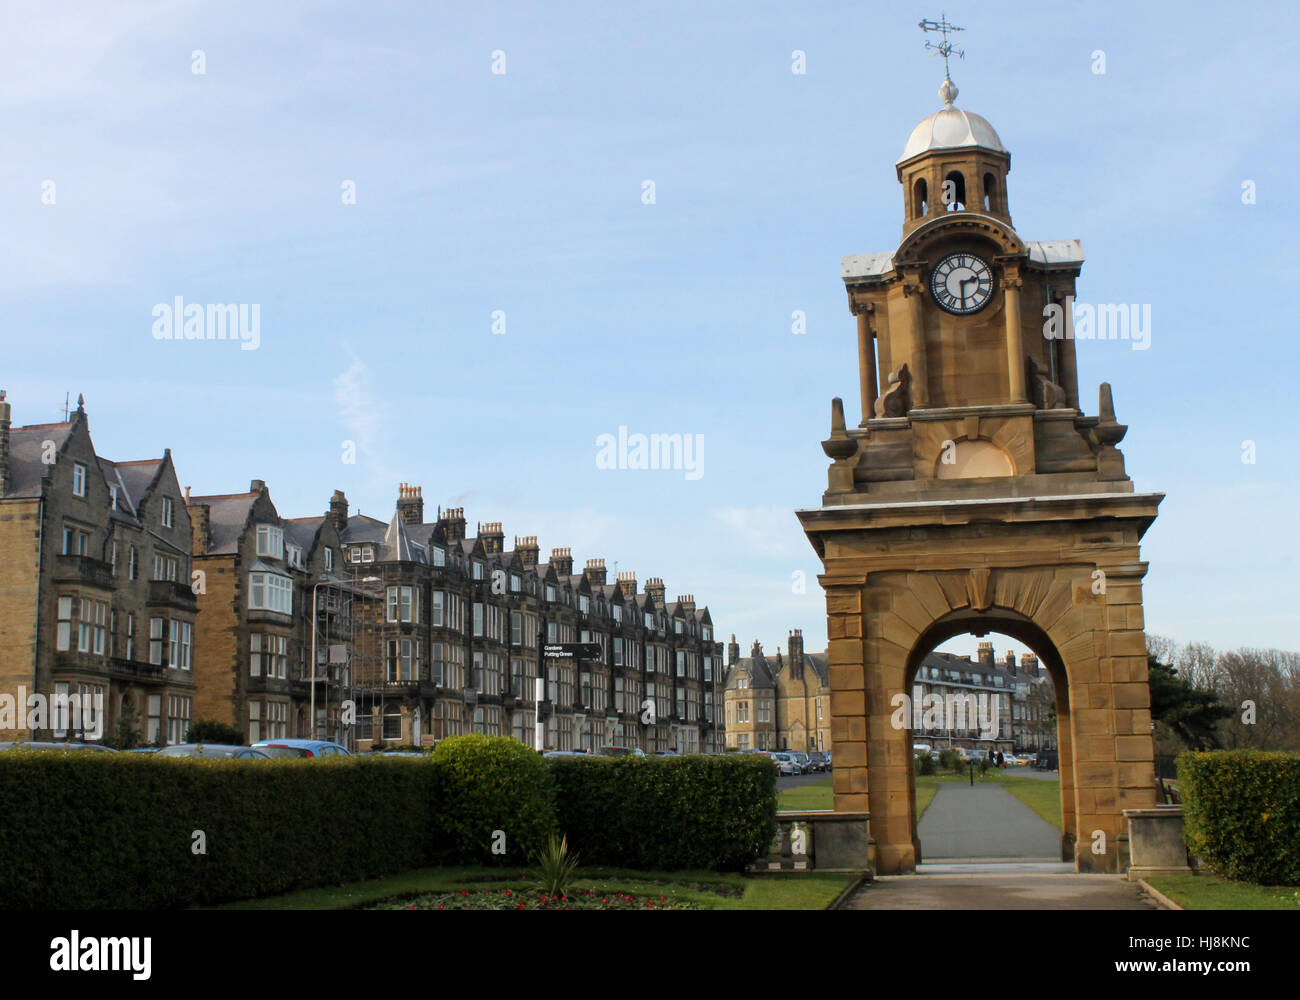 travel, monument, clock, date, time, time indication, england, daylight, clock Stock Photo